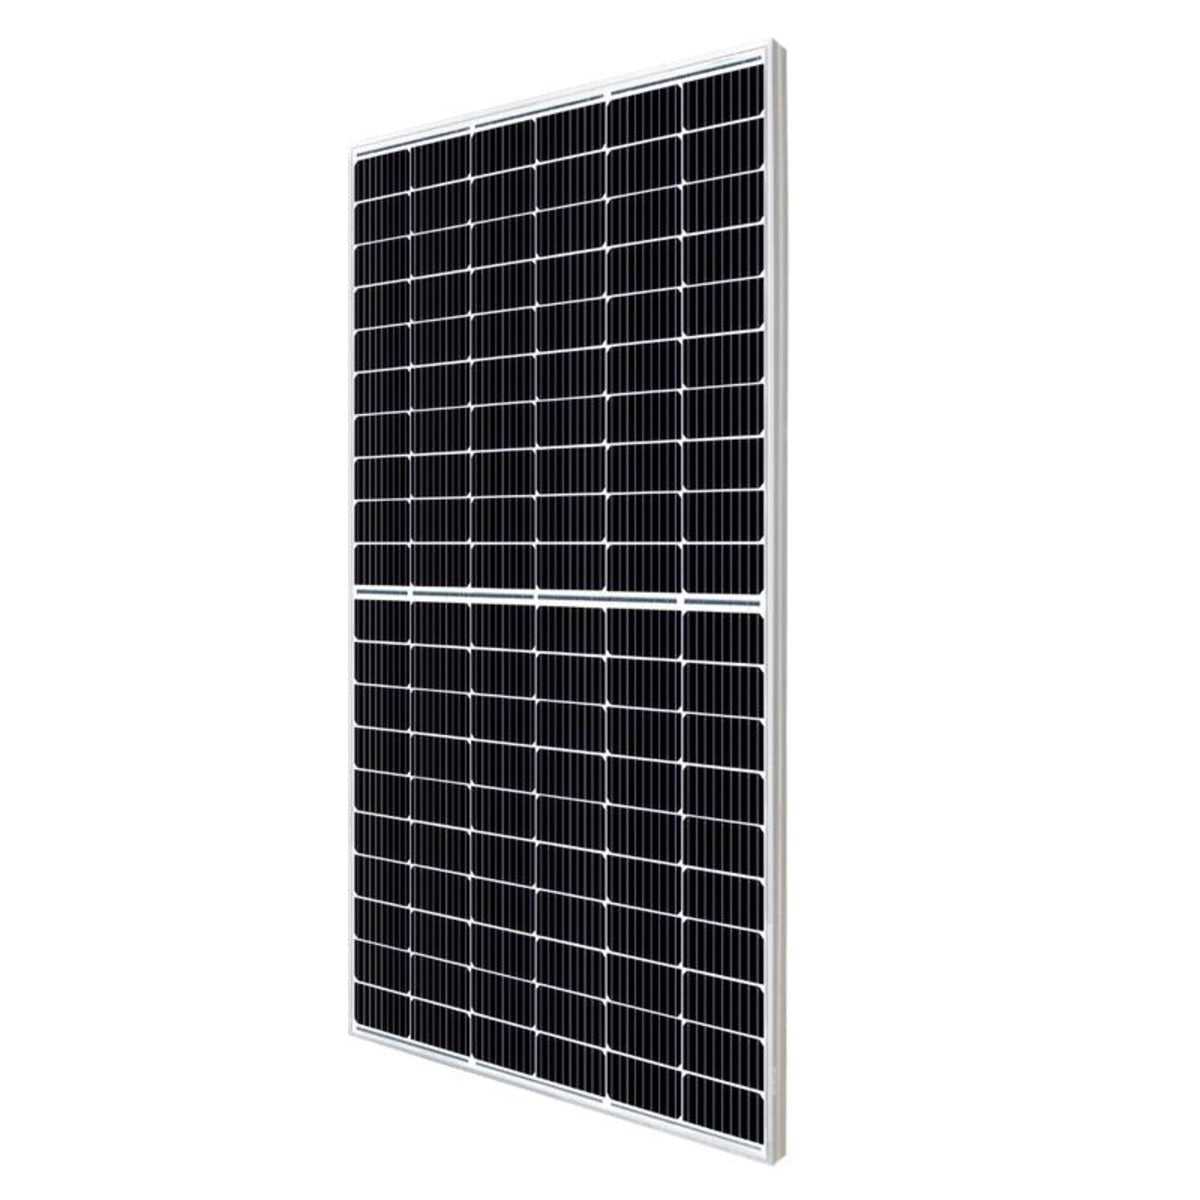 Canadian Solar, Canadian Solar 555W TopHiKU6 Solar Panel with T6 and F30 Frame